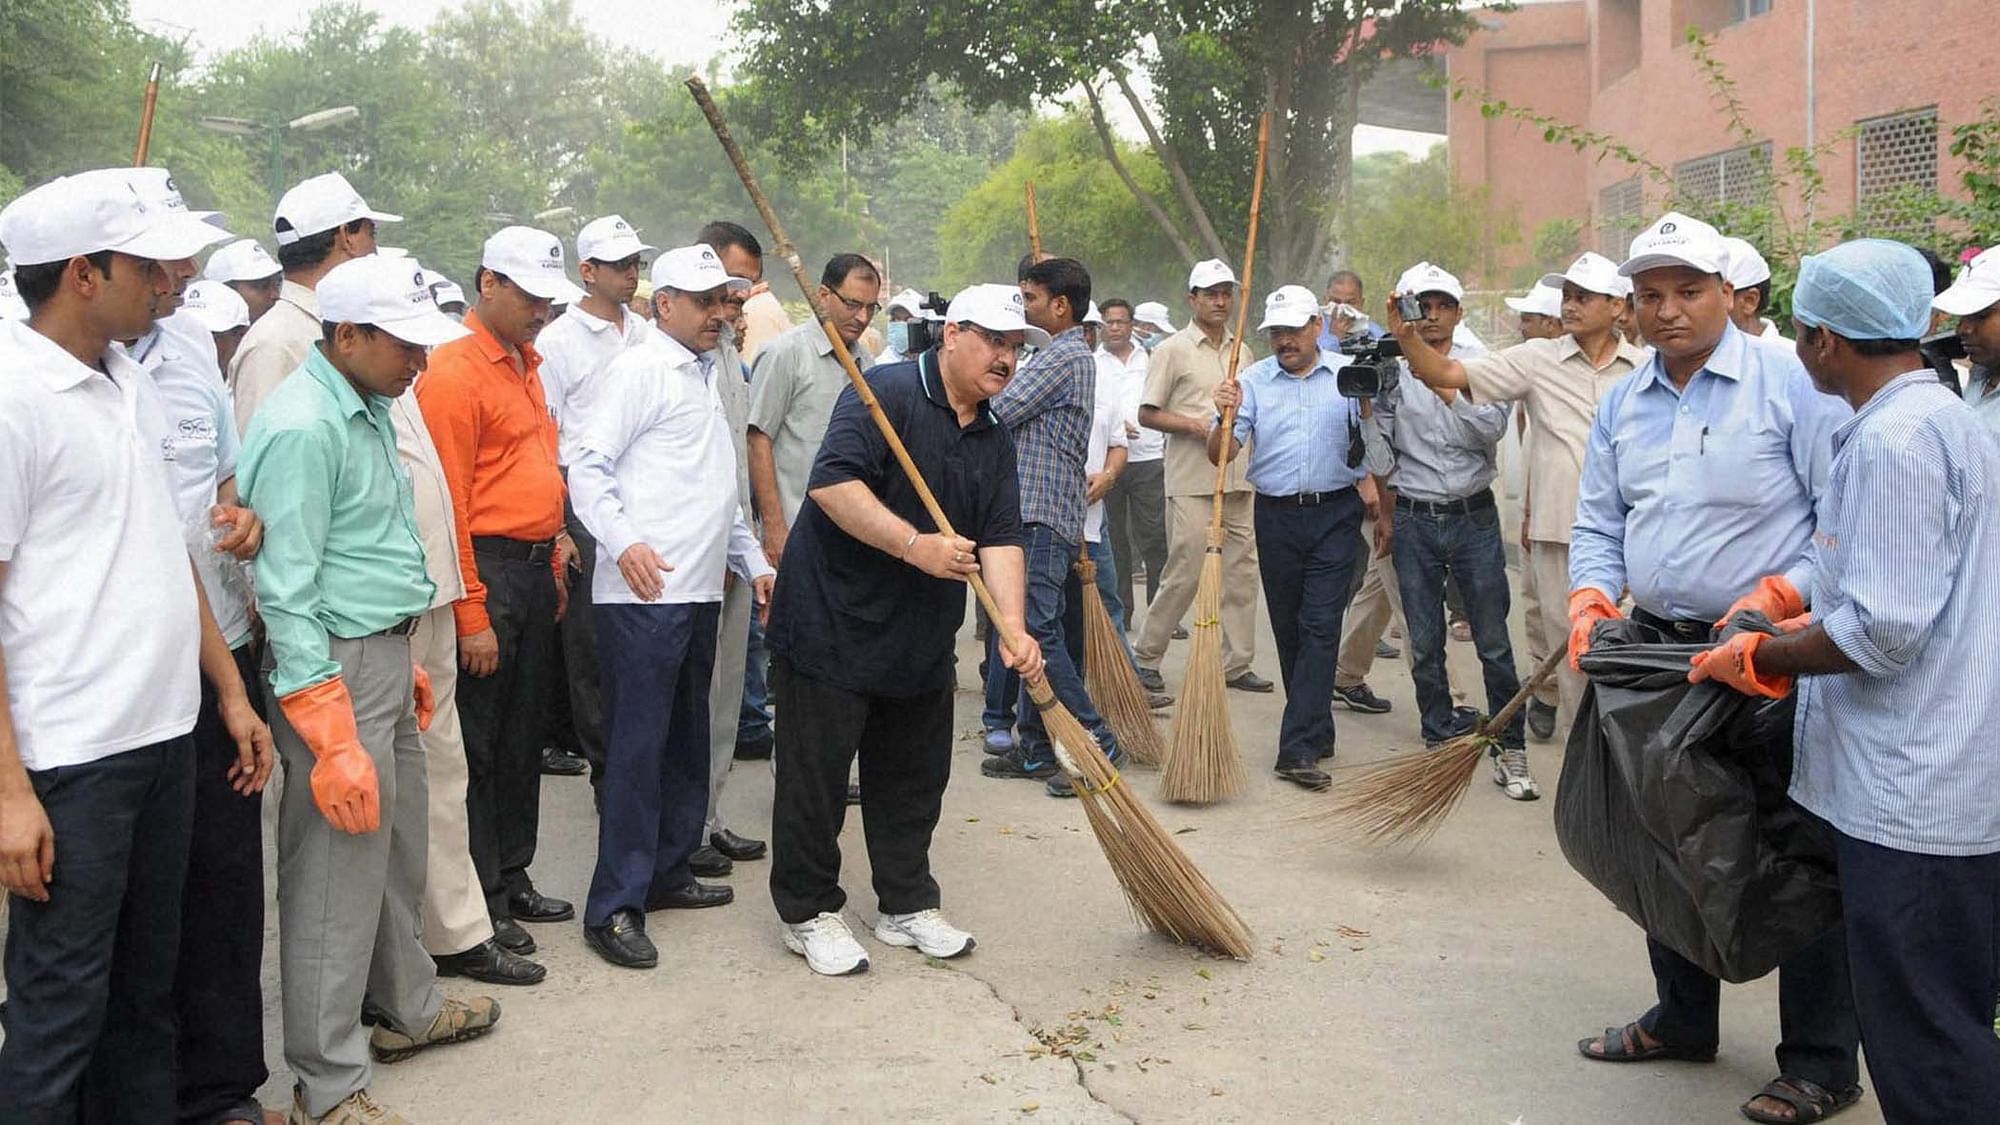 Union Health and Family Welfare Minister, JP Nadda takes part in a Swachh Bharat programme, in New Delhi, on Sunday. (Photo: PTI)